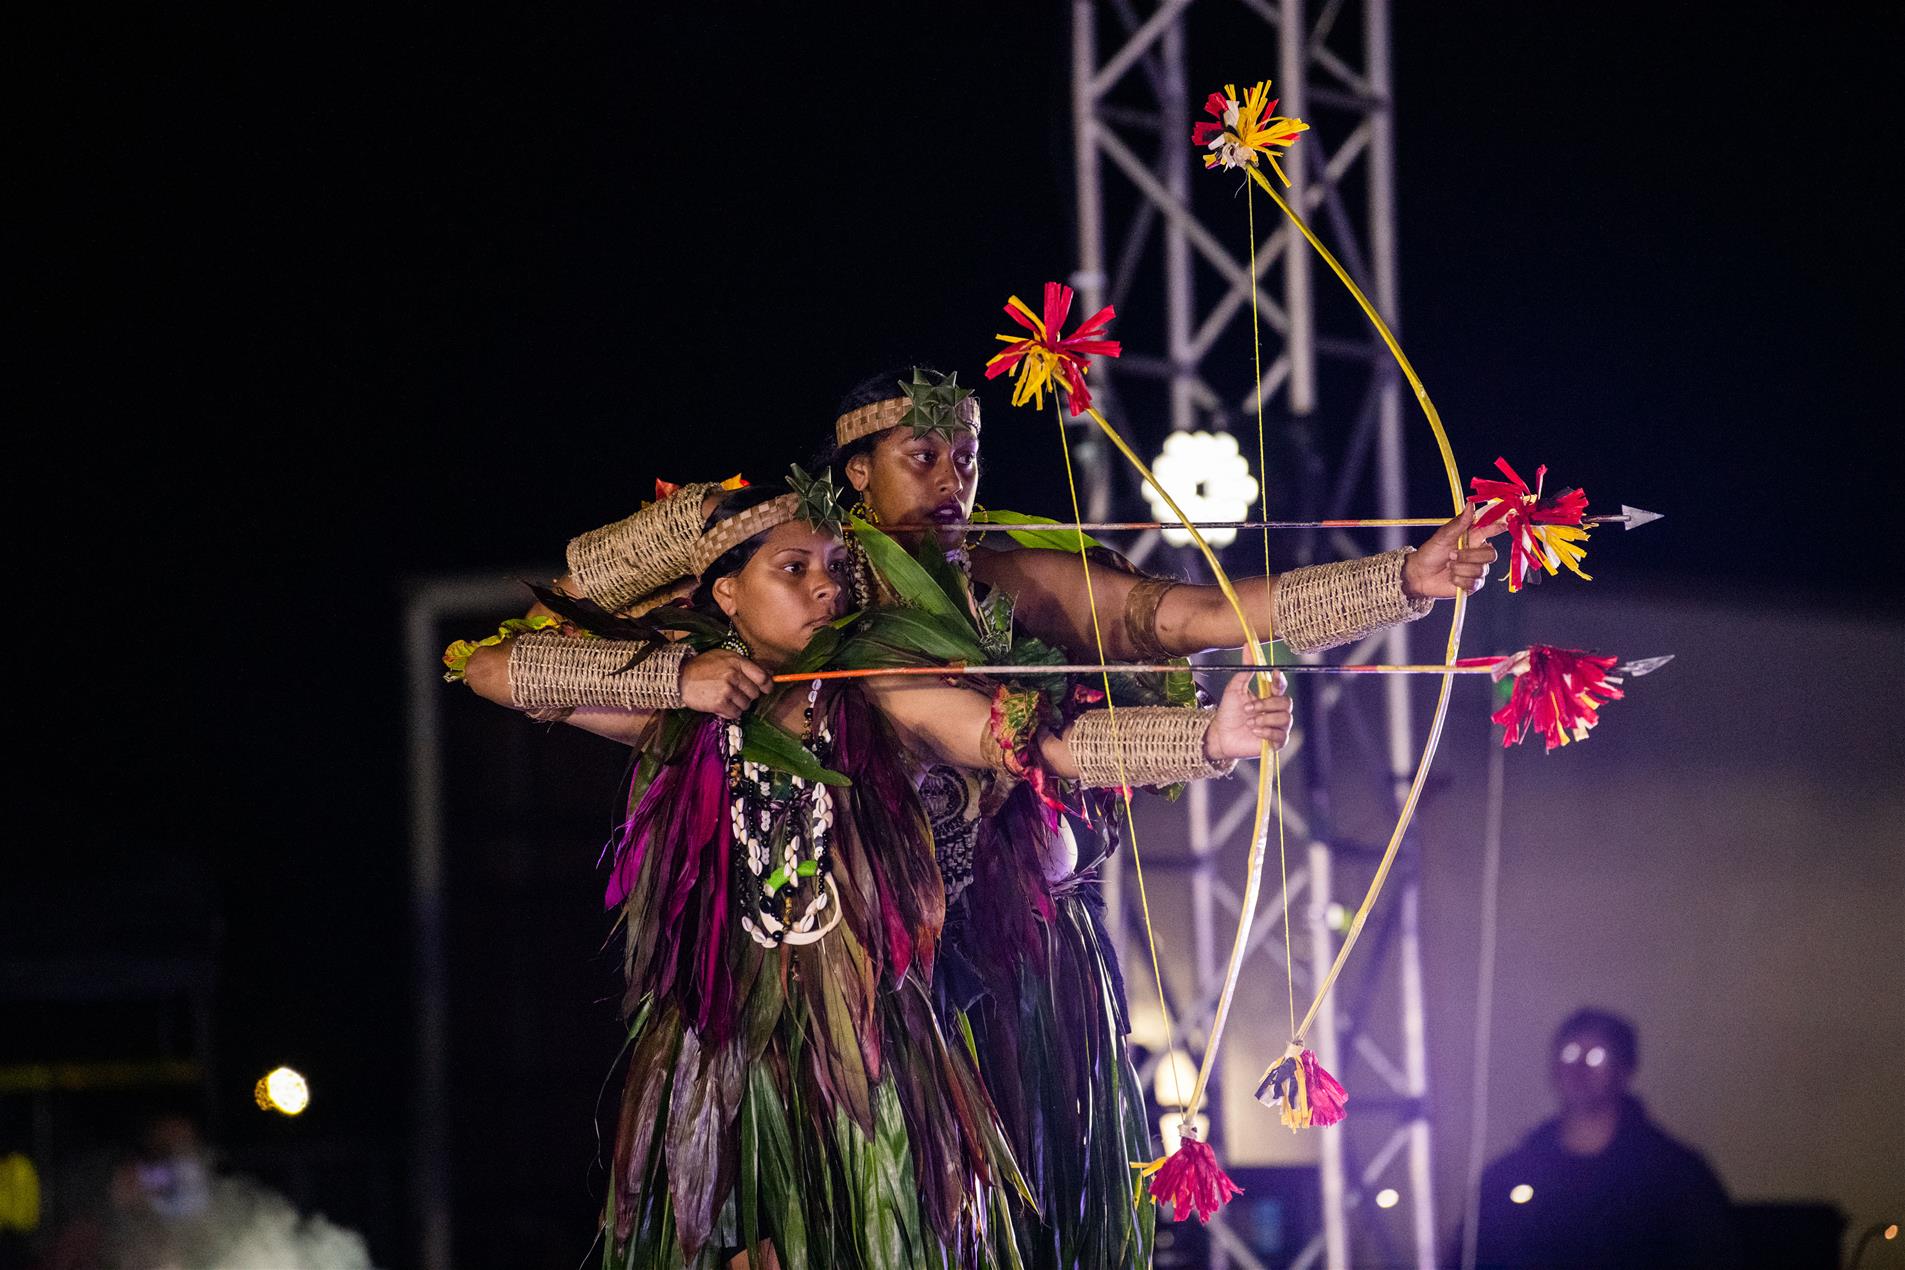 Two female performers wearing cultural attire holding bow and arrows.